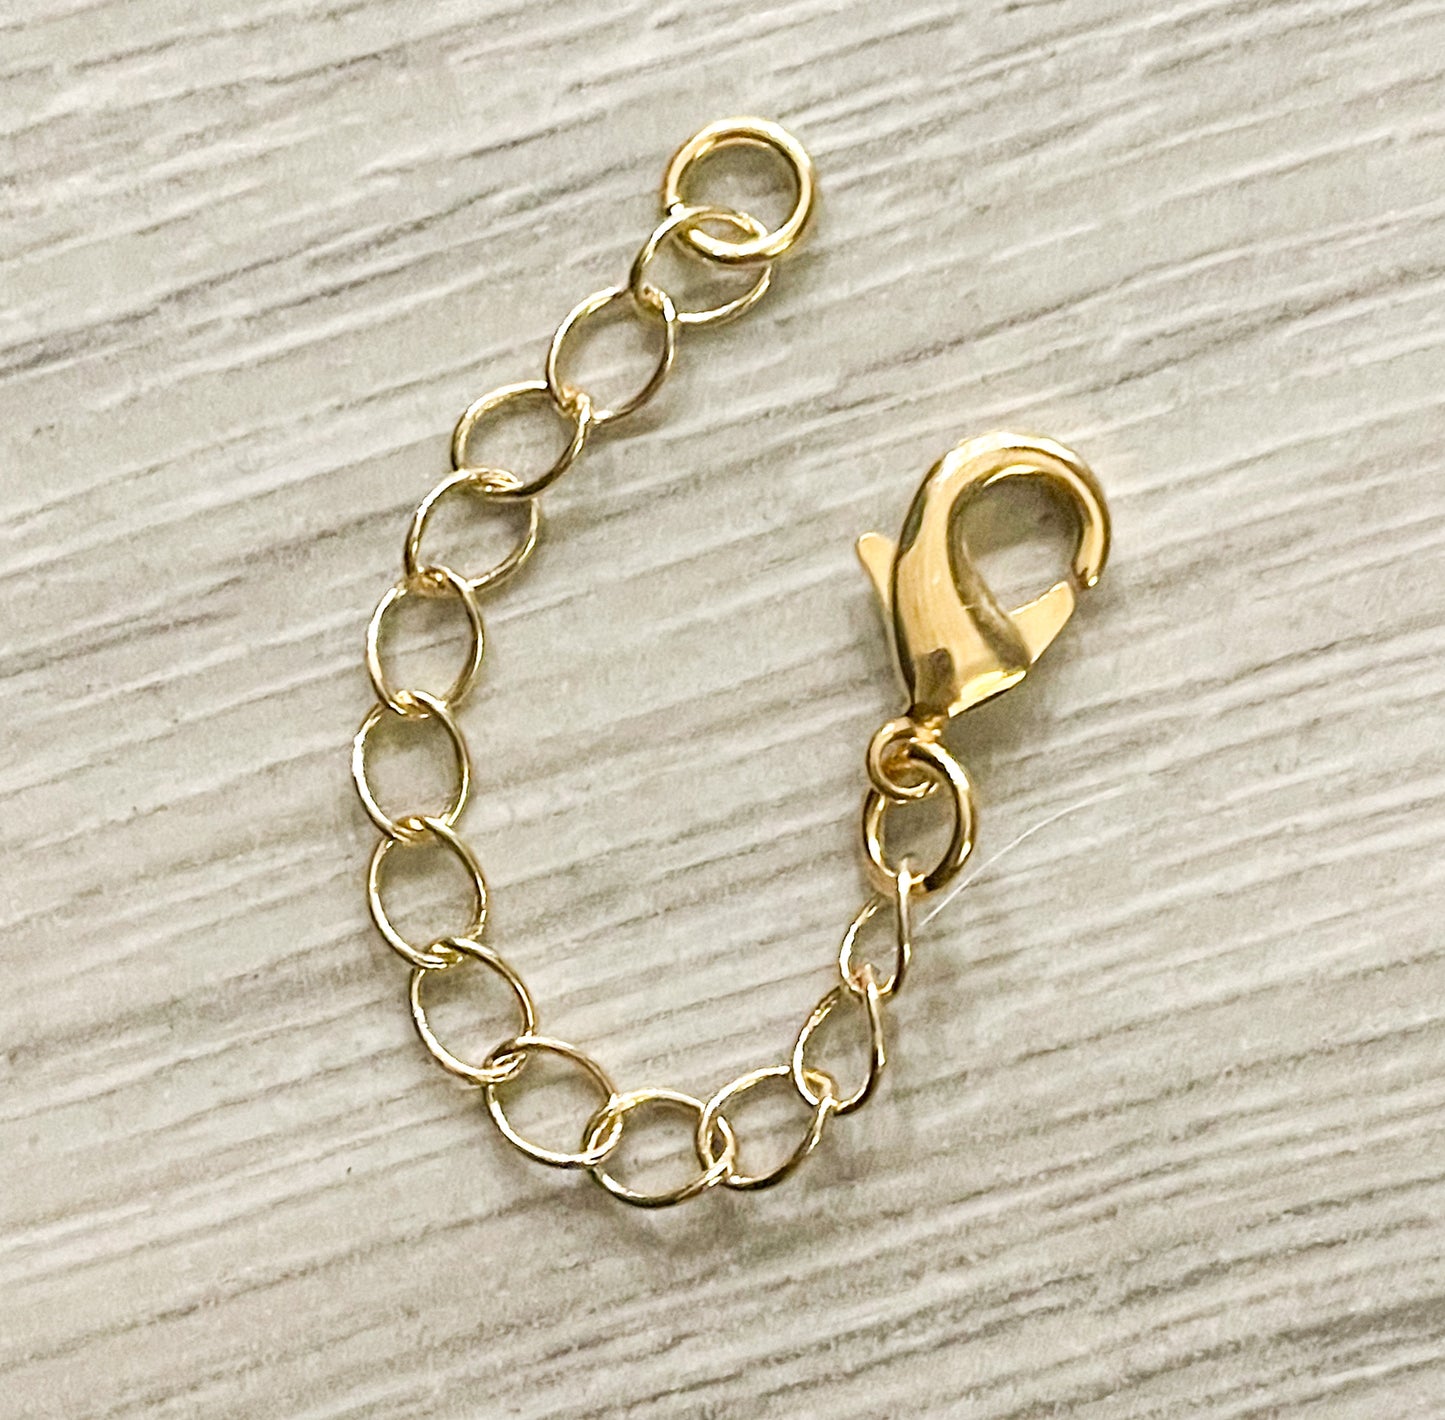 2 Inch - 18k Gold Filled Extension